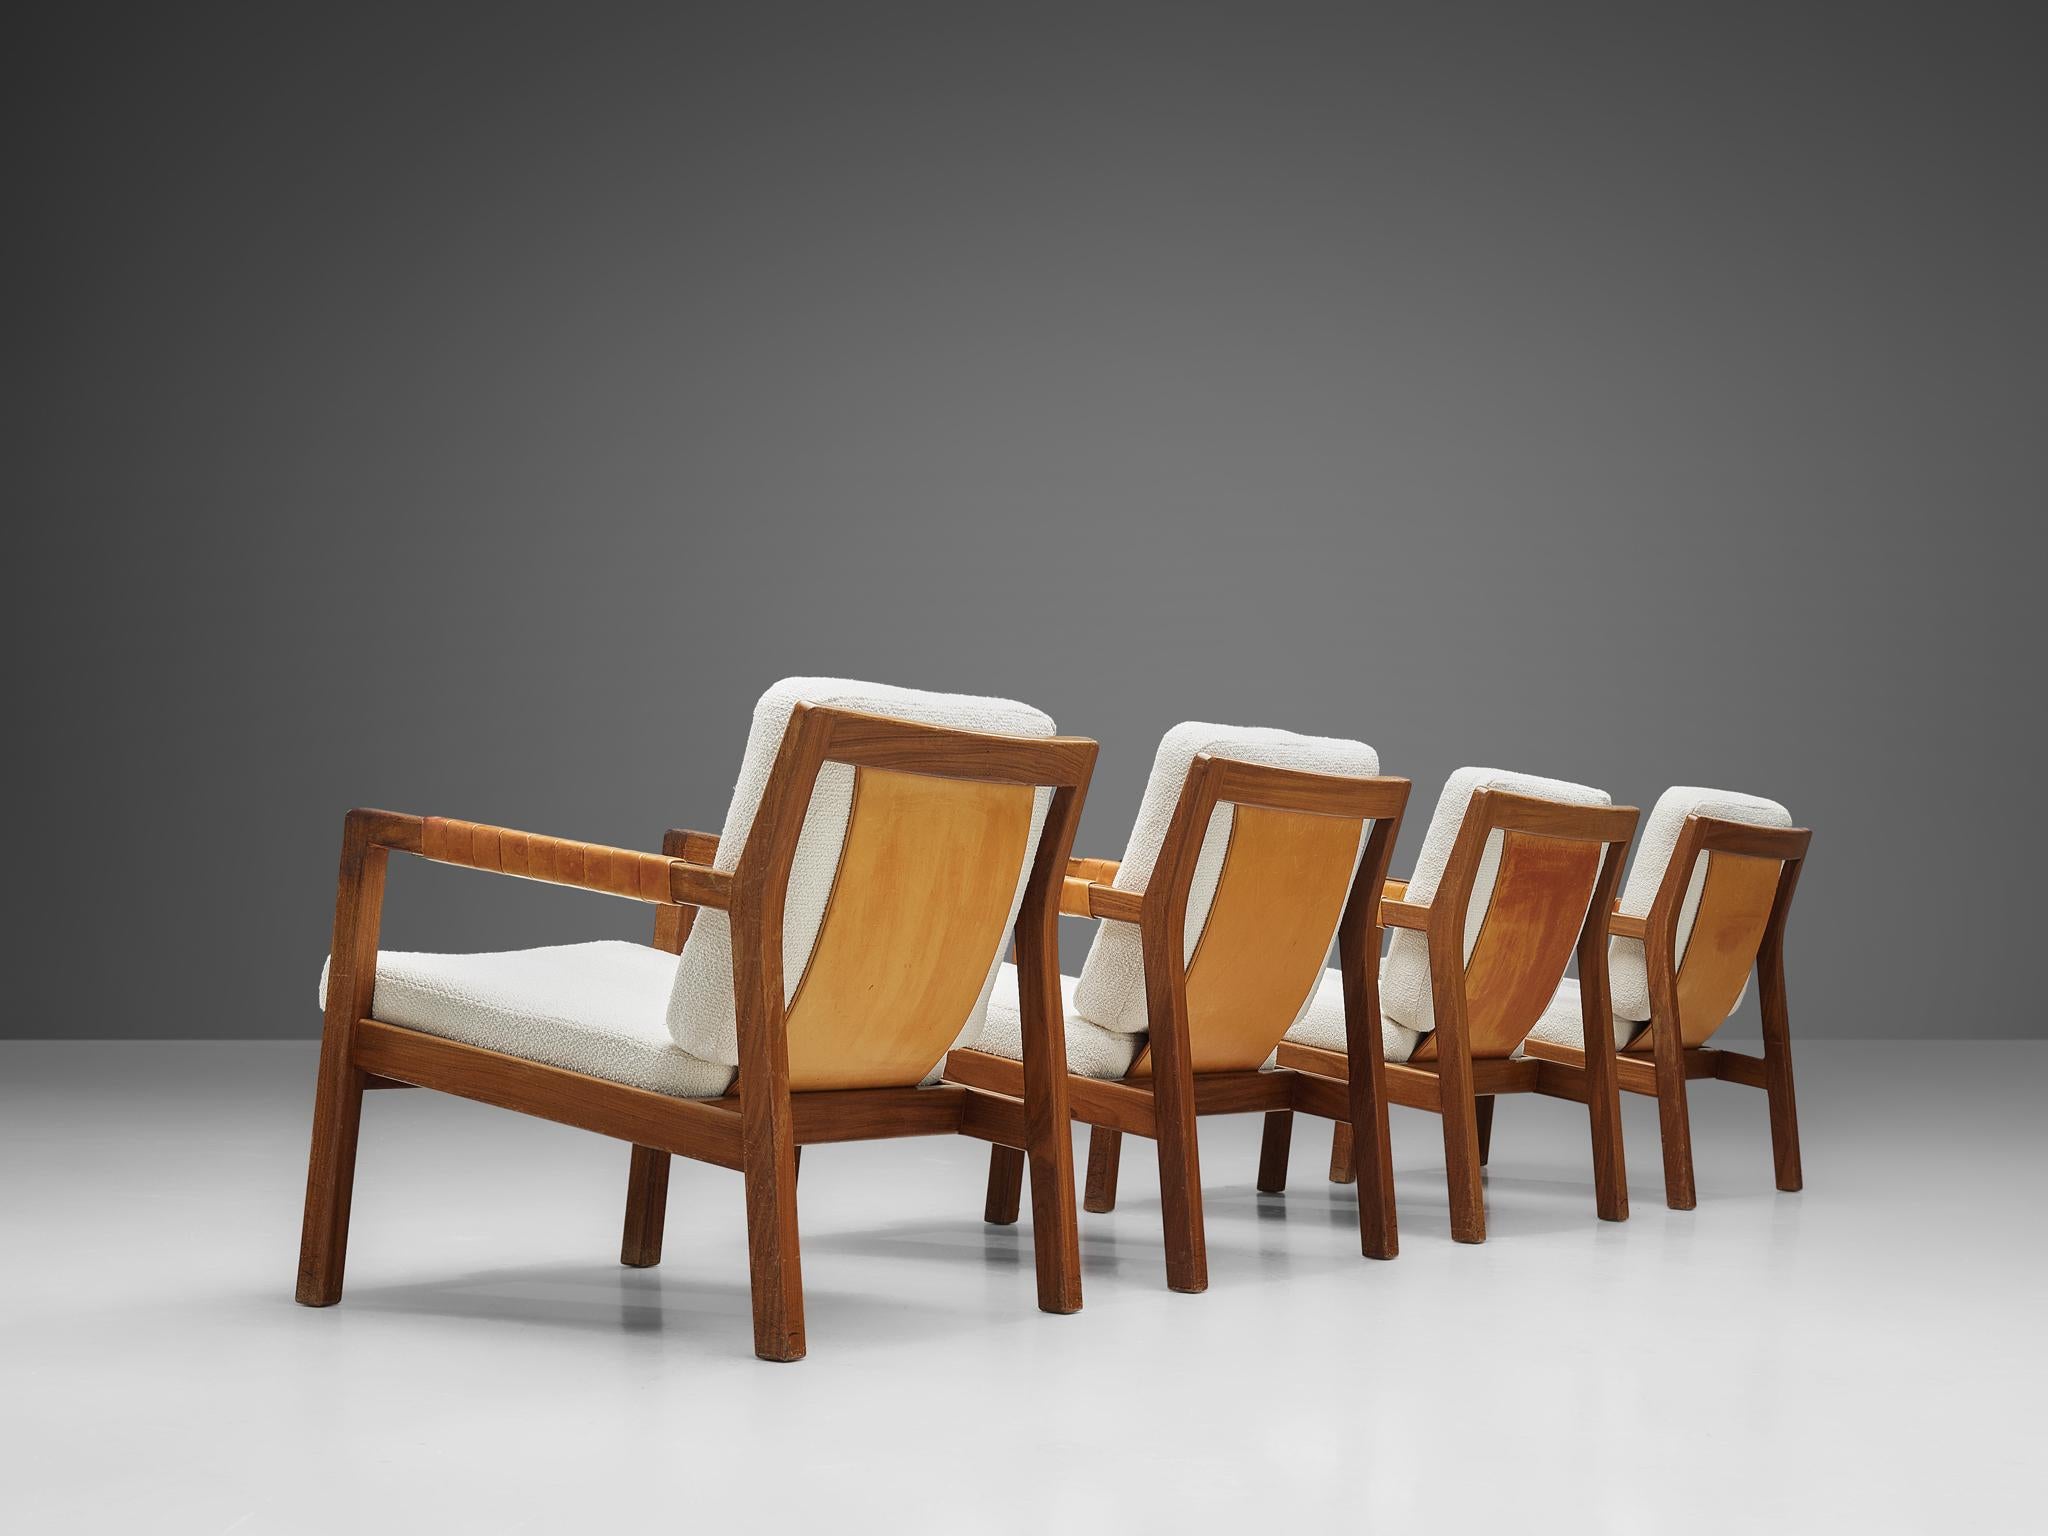 Carl Gustaf Hiort af Örnas for Puunveisto Oy, set of four armchairs, model 'Trienna, teak, leather, textured ivory upholstery, canvas, Finland, 1950s

Set of four easy chairs, designed by Carl Gustaf Hiort in the 1950s. The chairs display an